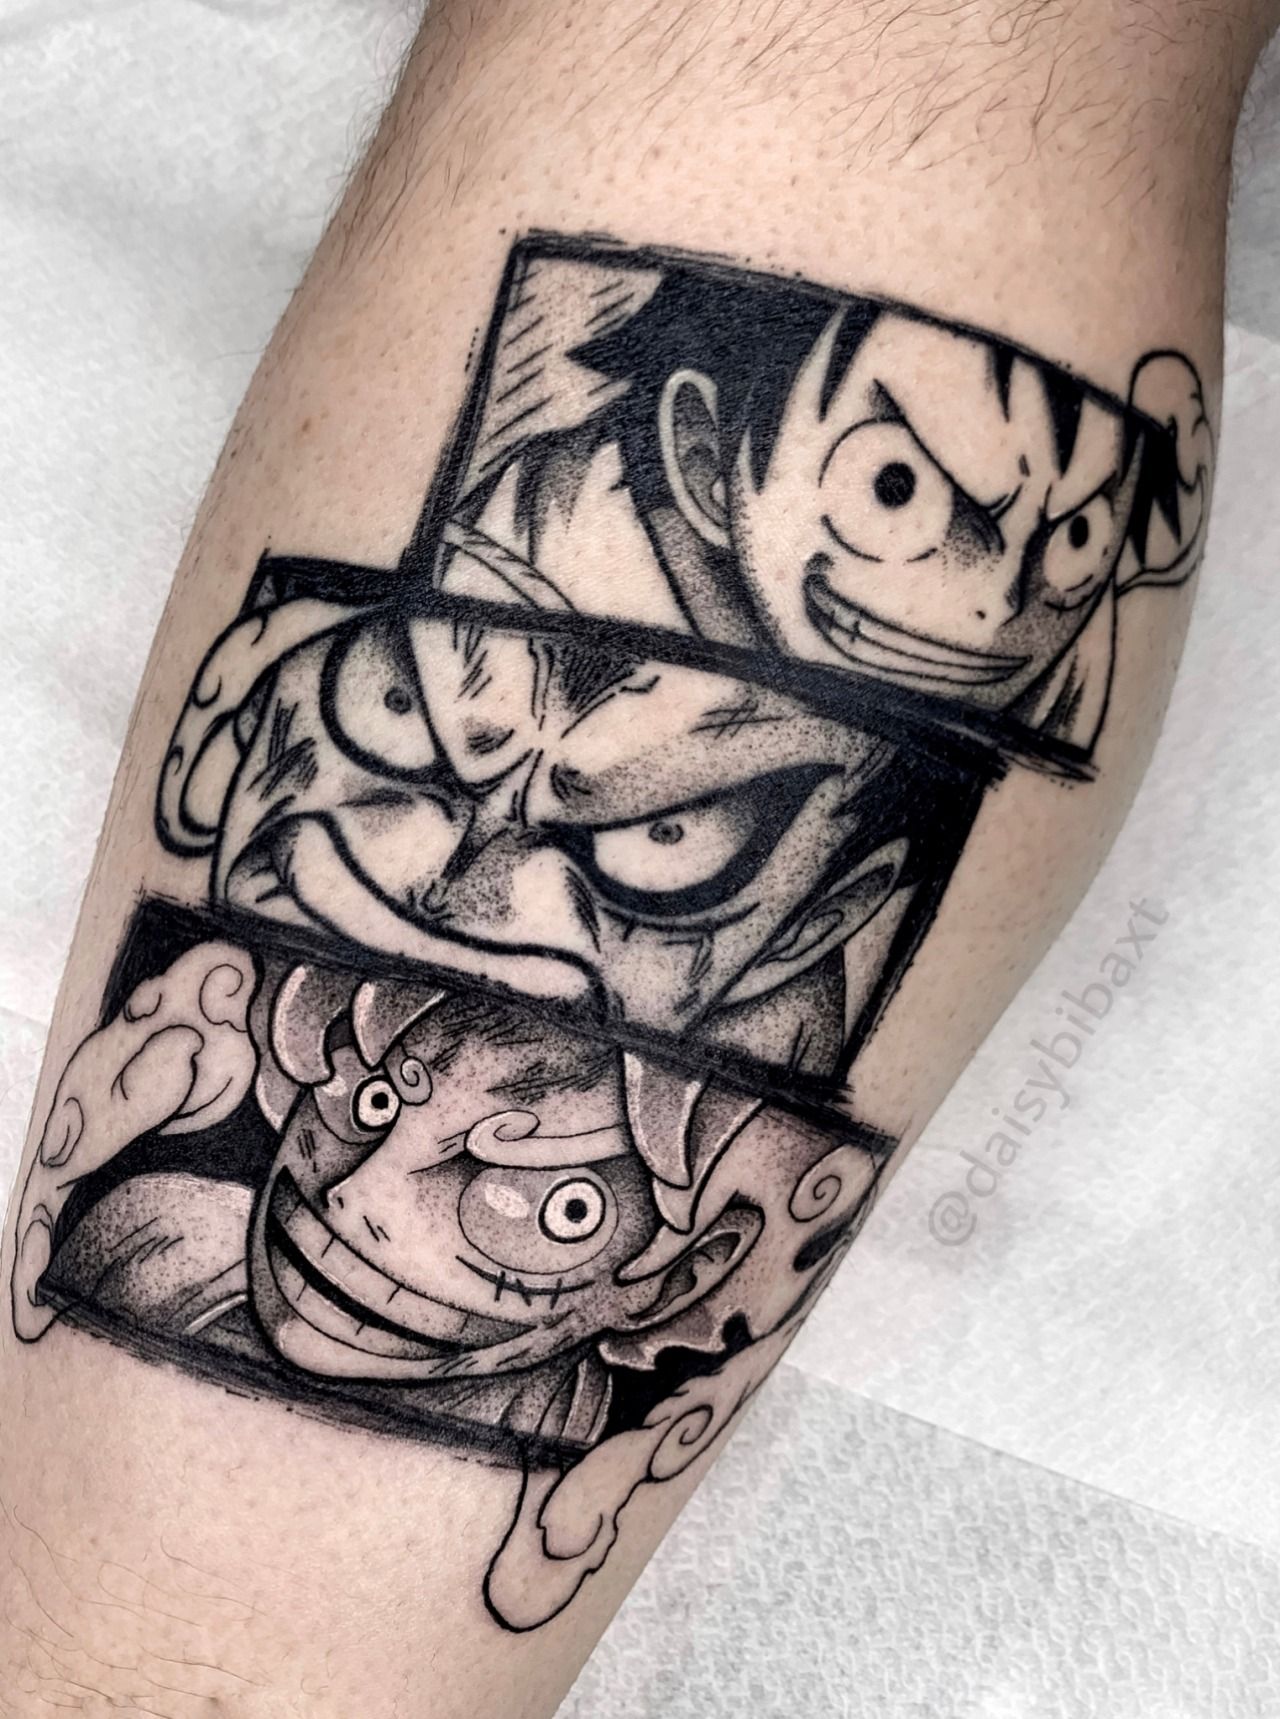 Zoro and Luffy as cats! I love this tattoos made by @hiacyntaa : r/OnePiece